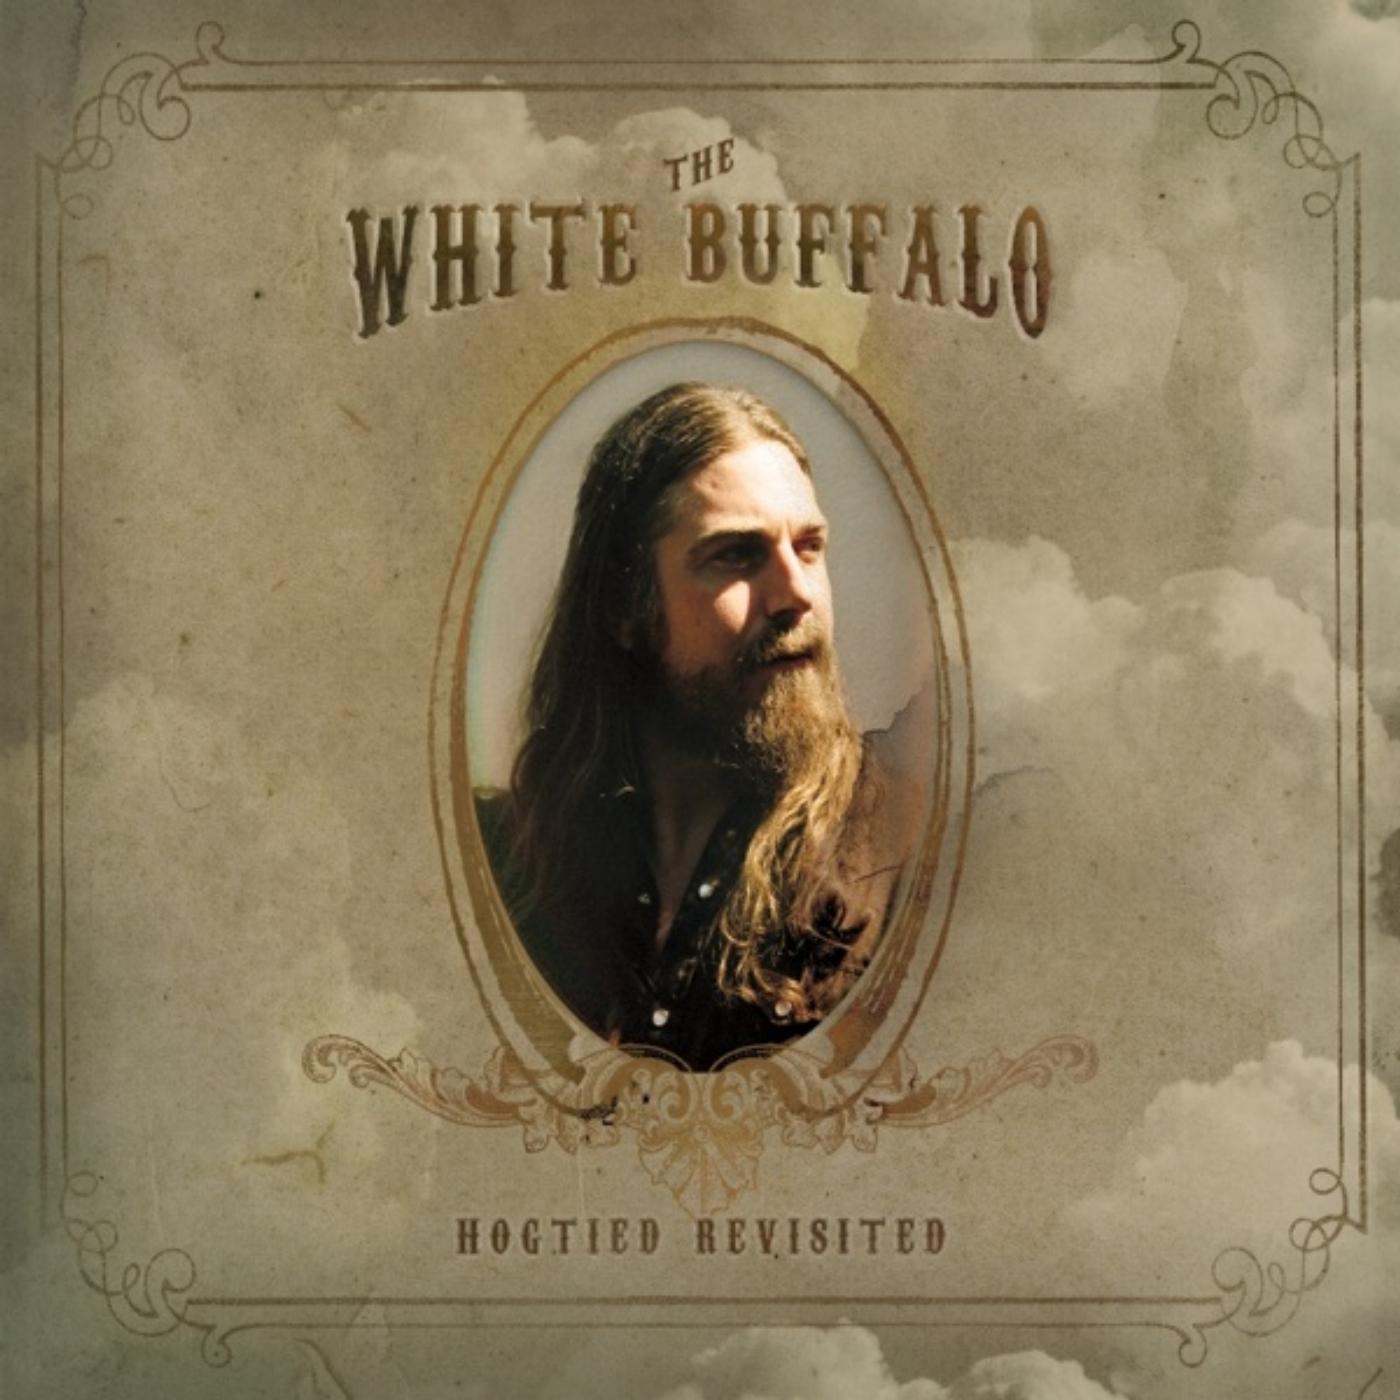 White Buffalo, The - Hogtied Revisited - 2 x LP